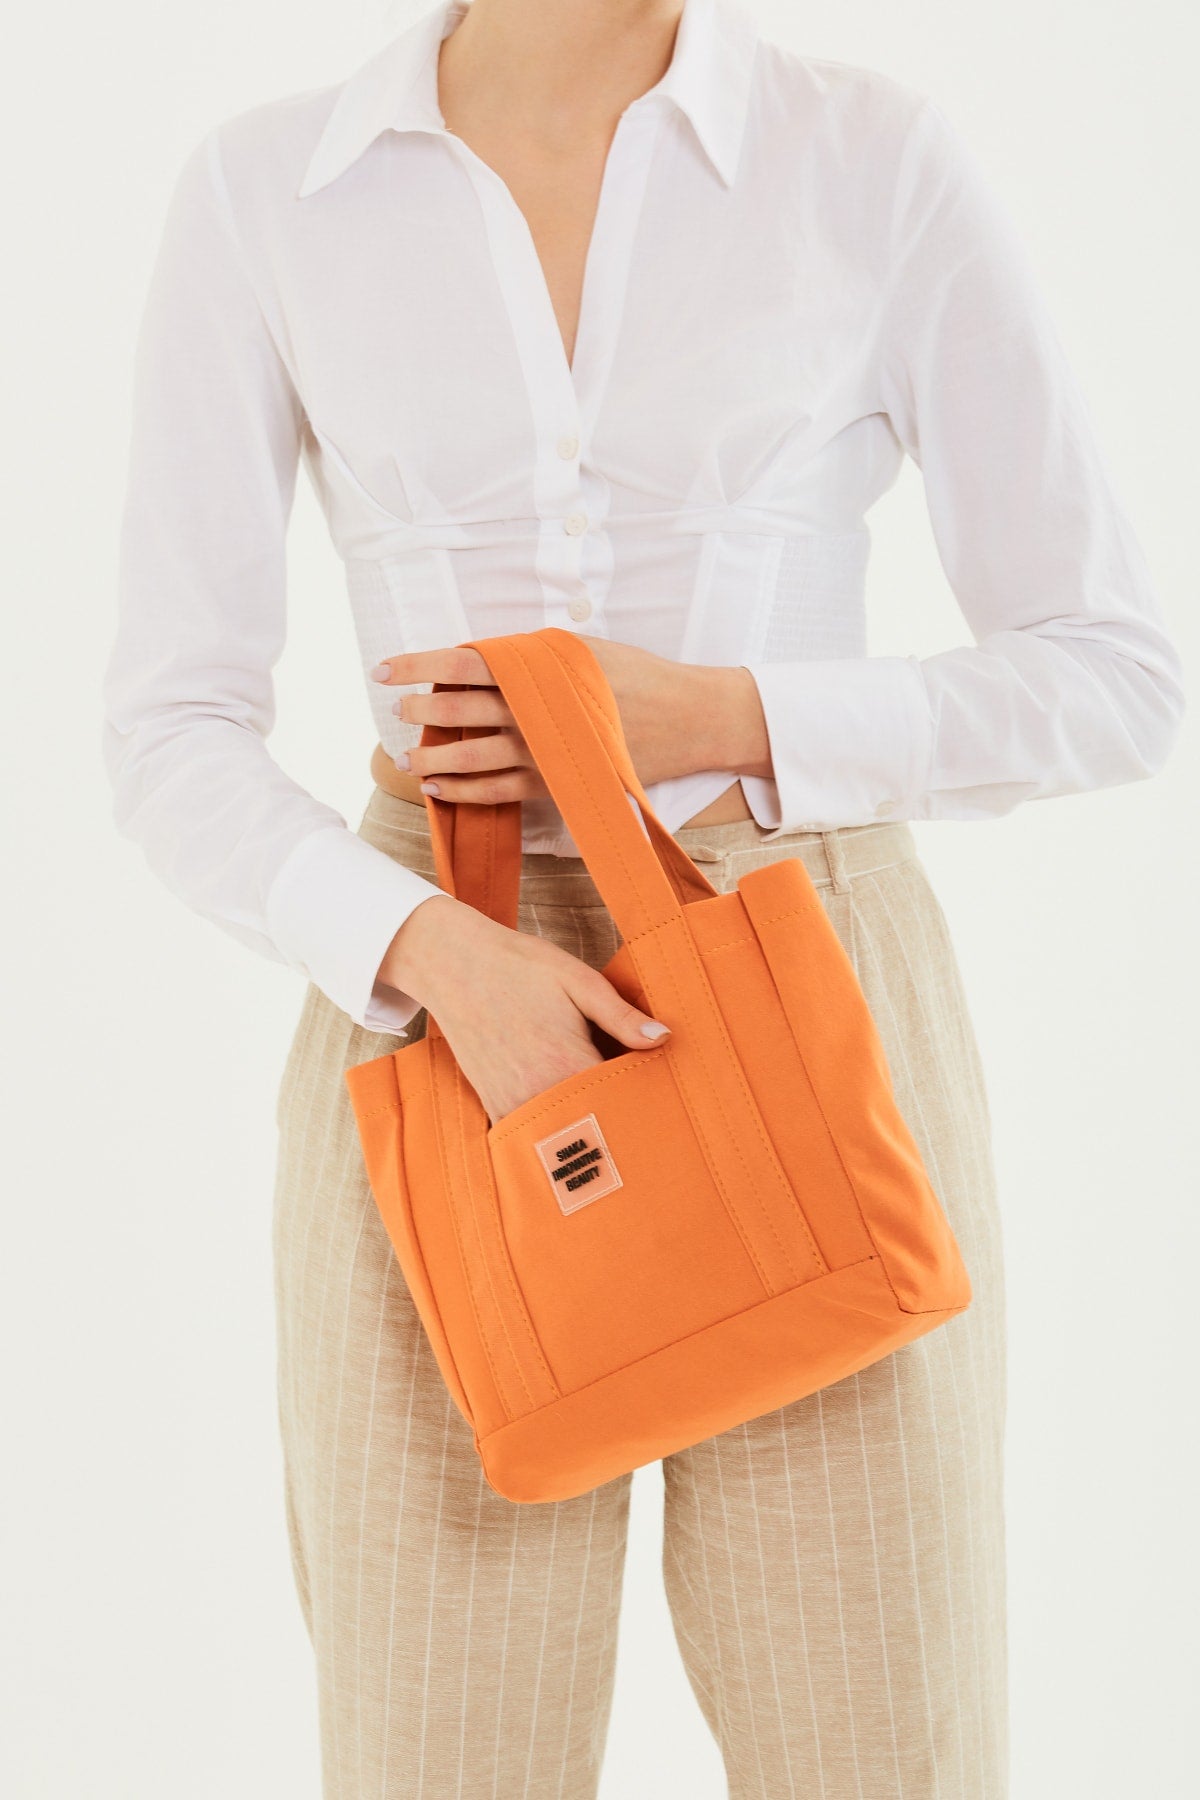 Orange U37 Snap Closure 2 Compartment Front Pocket Detailed Canvas Fabric Daily Women's Arm And Shoulder Bag